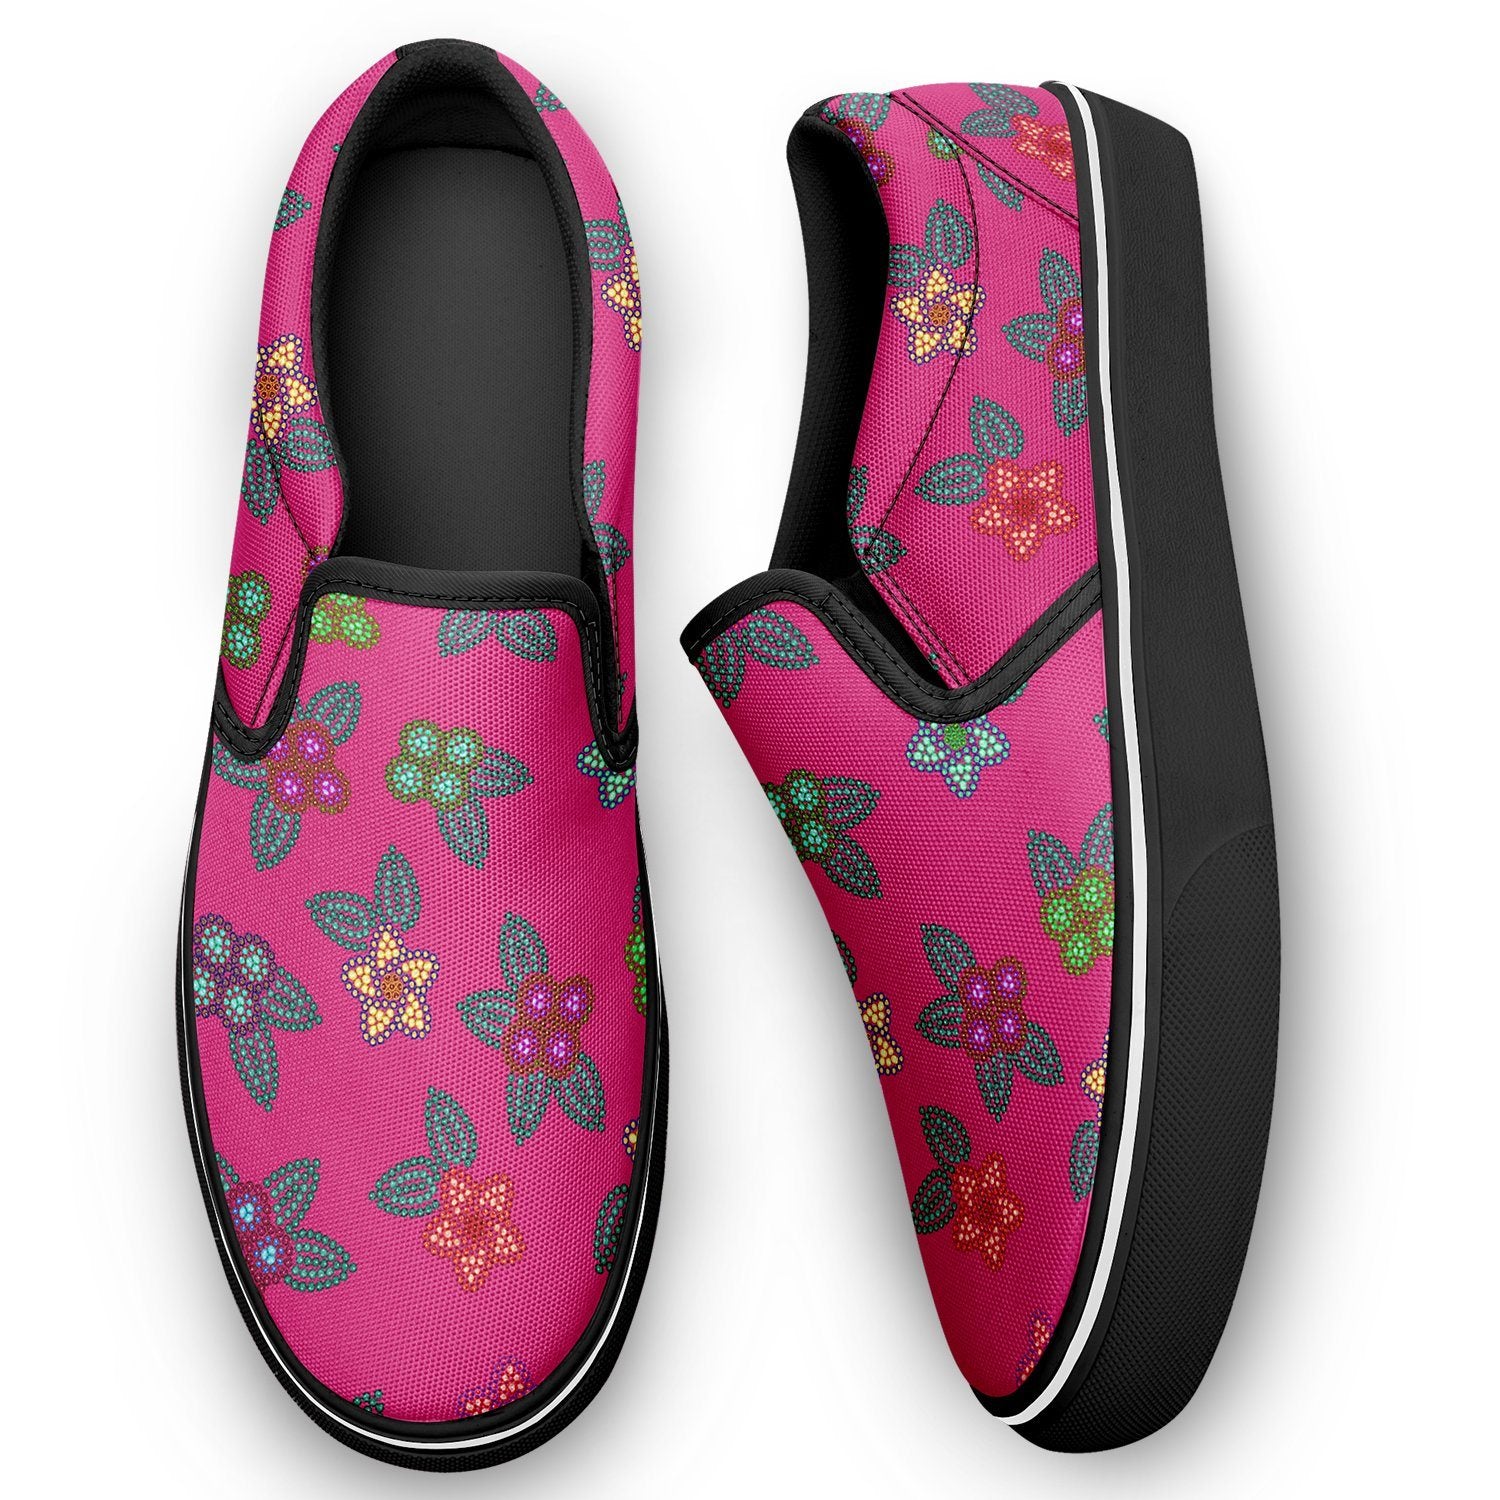 Berry Flowers Otoyimm Canvas Slip On Shoes otoyimm Herman 